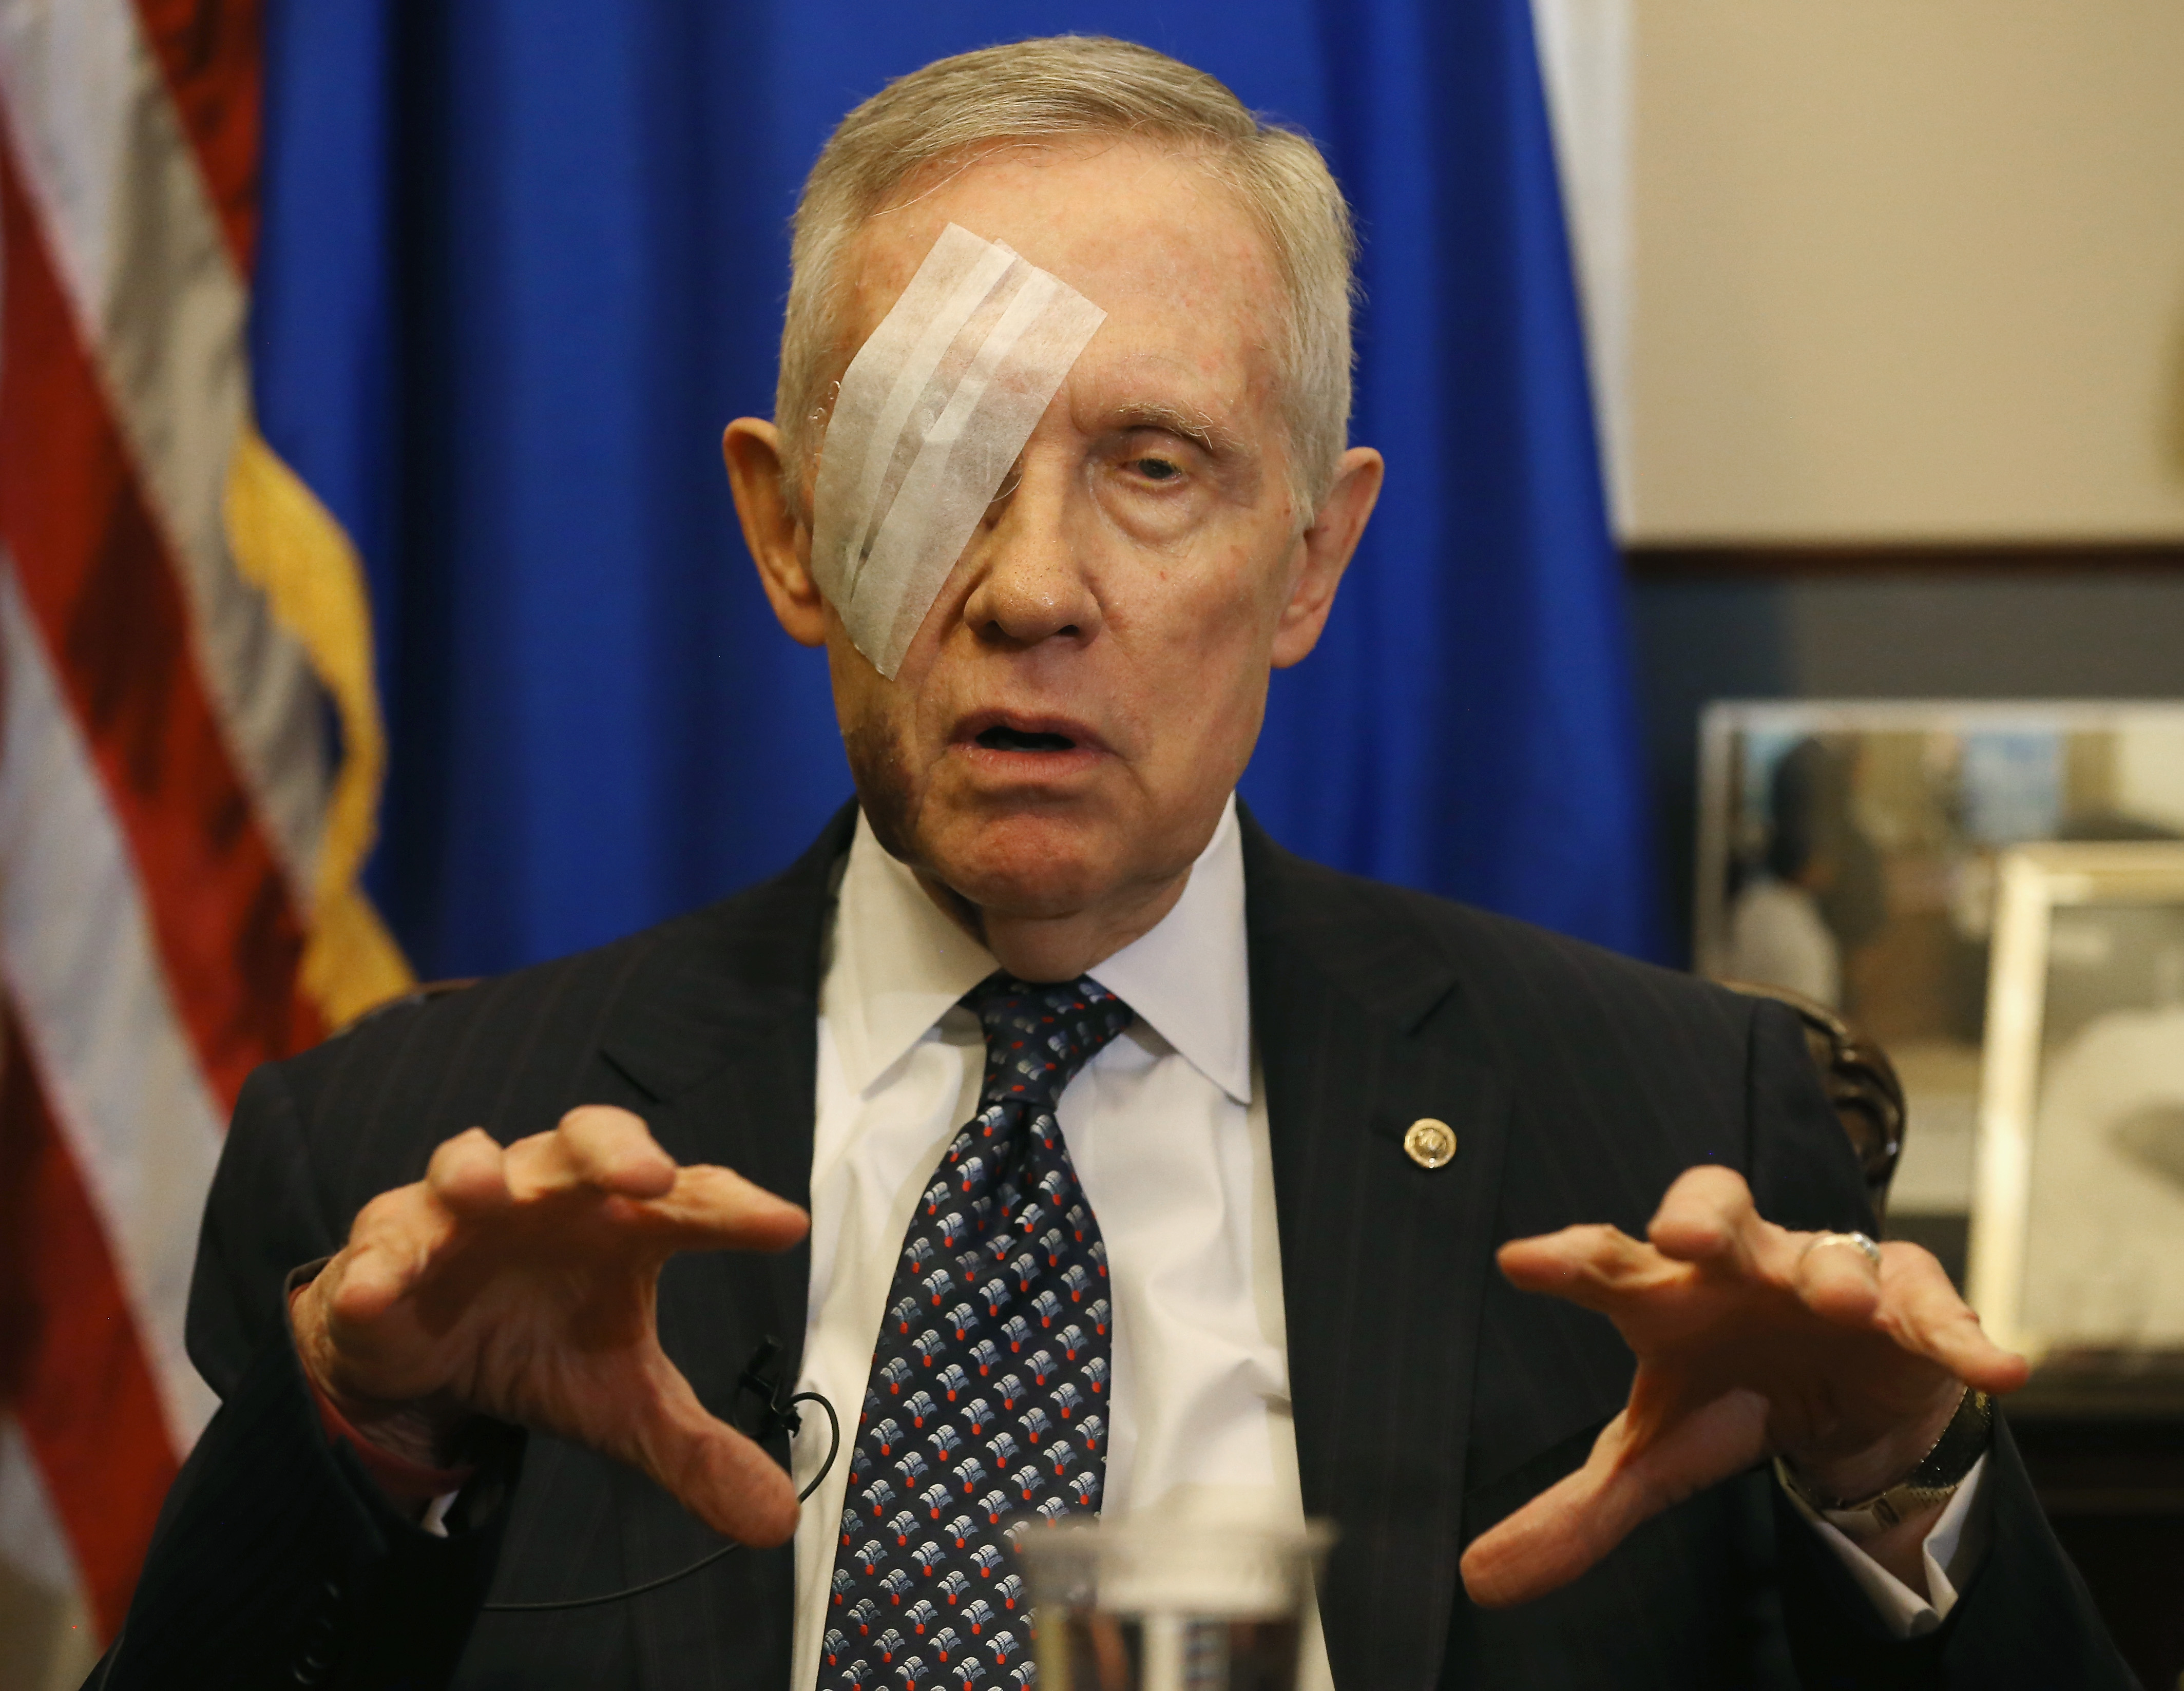 Senate Minority Leader Harry Reid (D-AZ) speaks during a pen and pad session with reporters at the US Capitol on Jan. 22, 2015 in Washington D.C. (Mark Wilson—Getty Images)